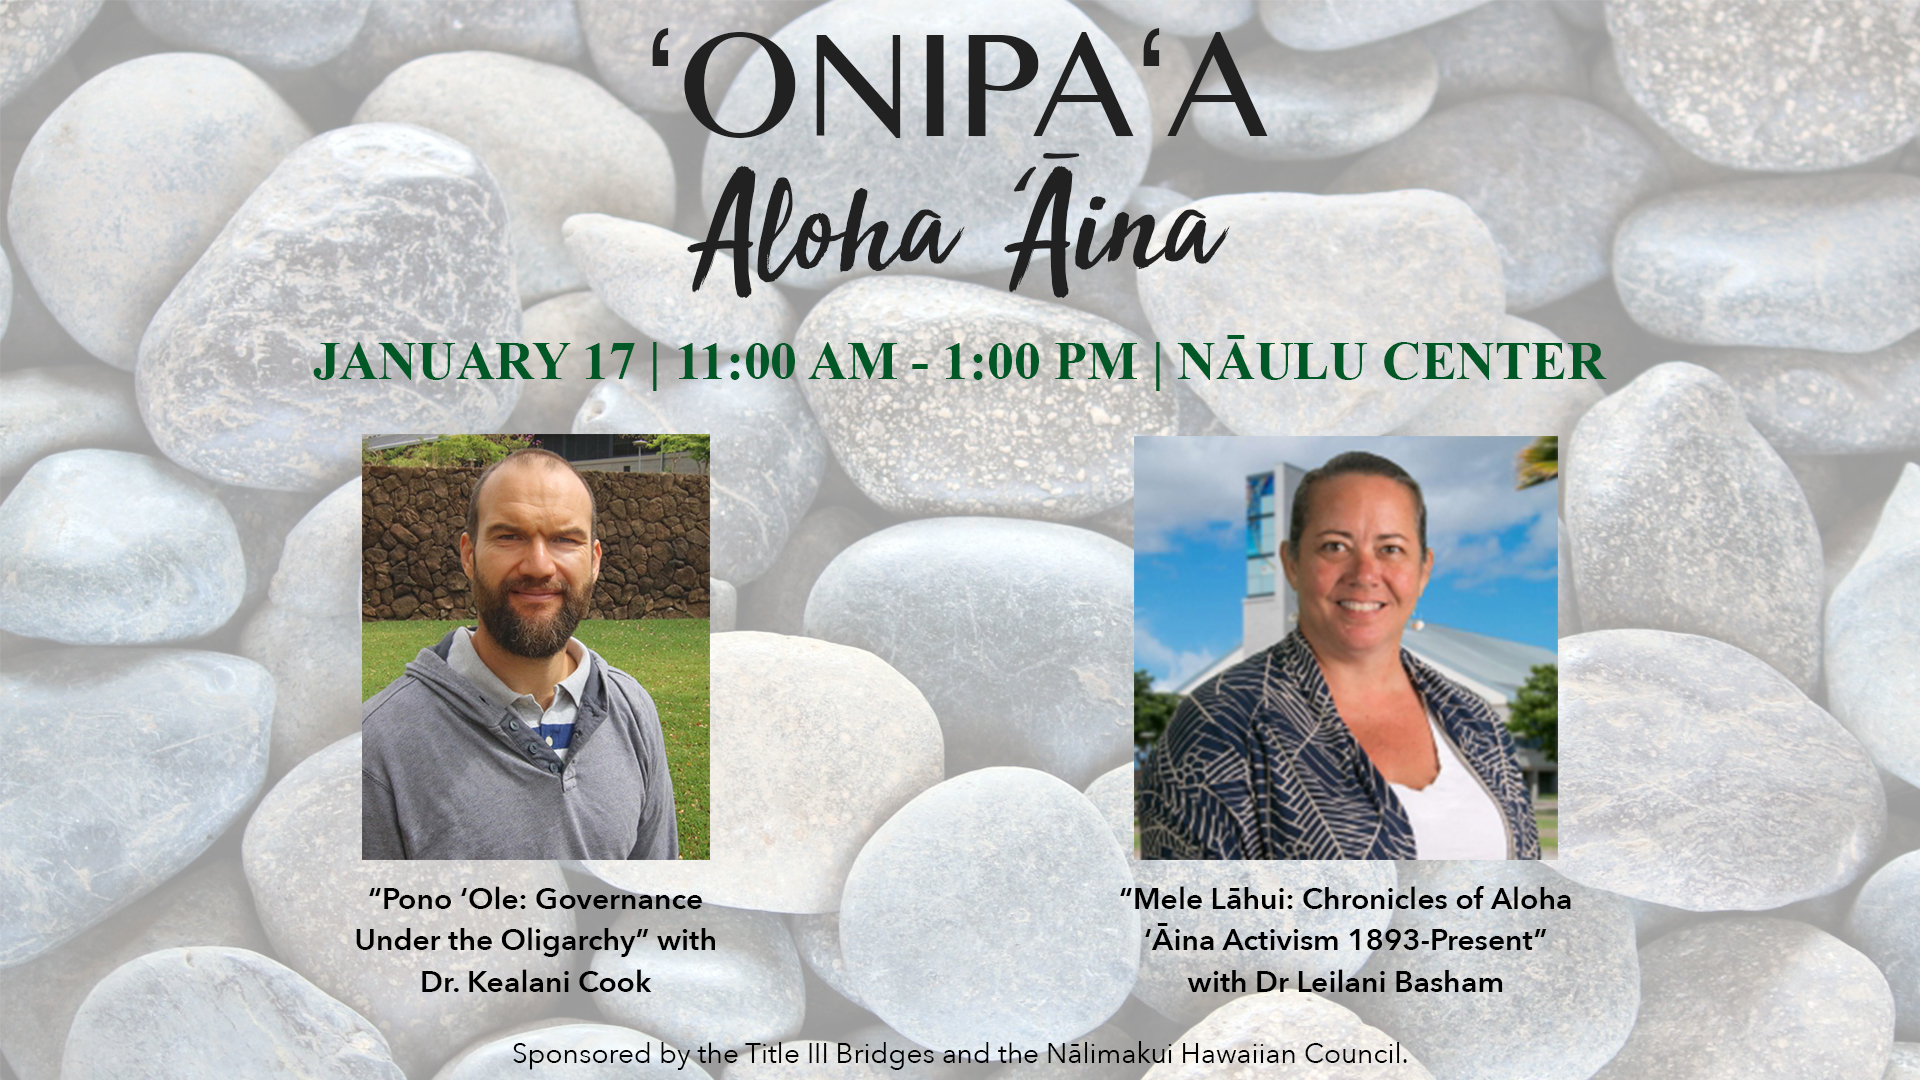 Flier for 'onipa'a Aloha 'Aina that has a background of rounded rocks and photos of two faculty members who will be speaking at the event